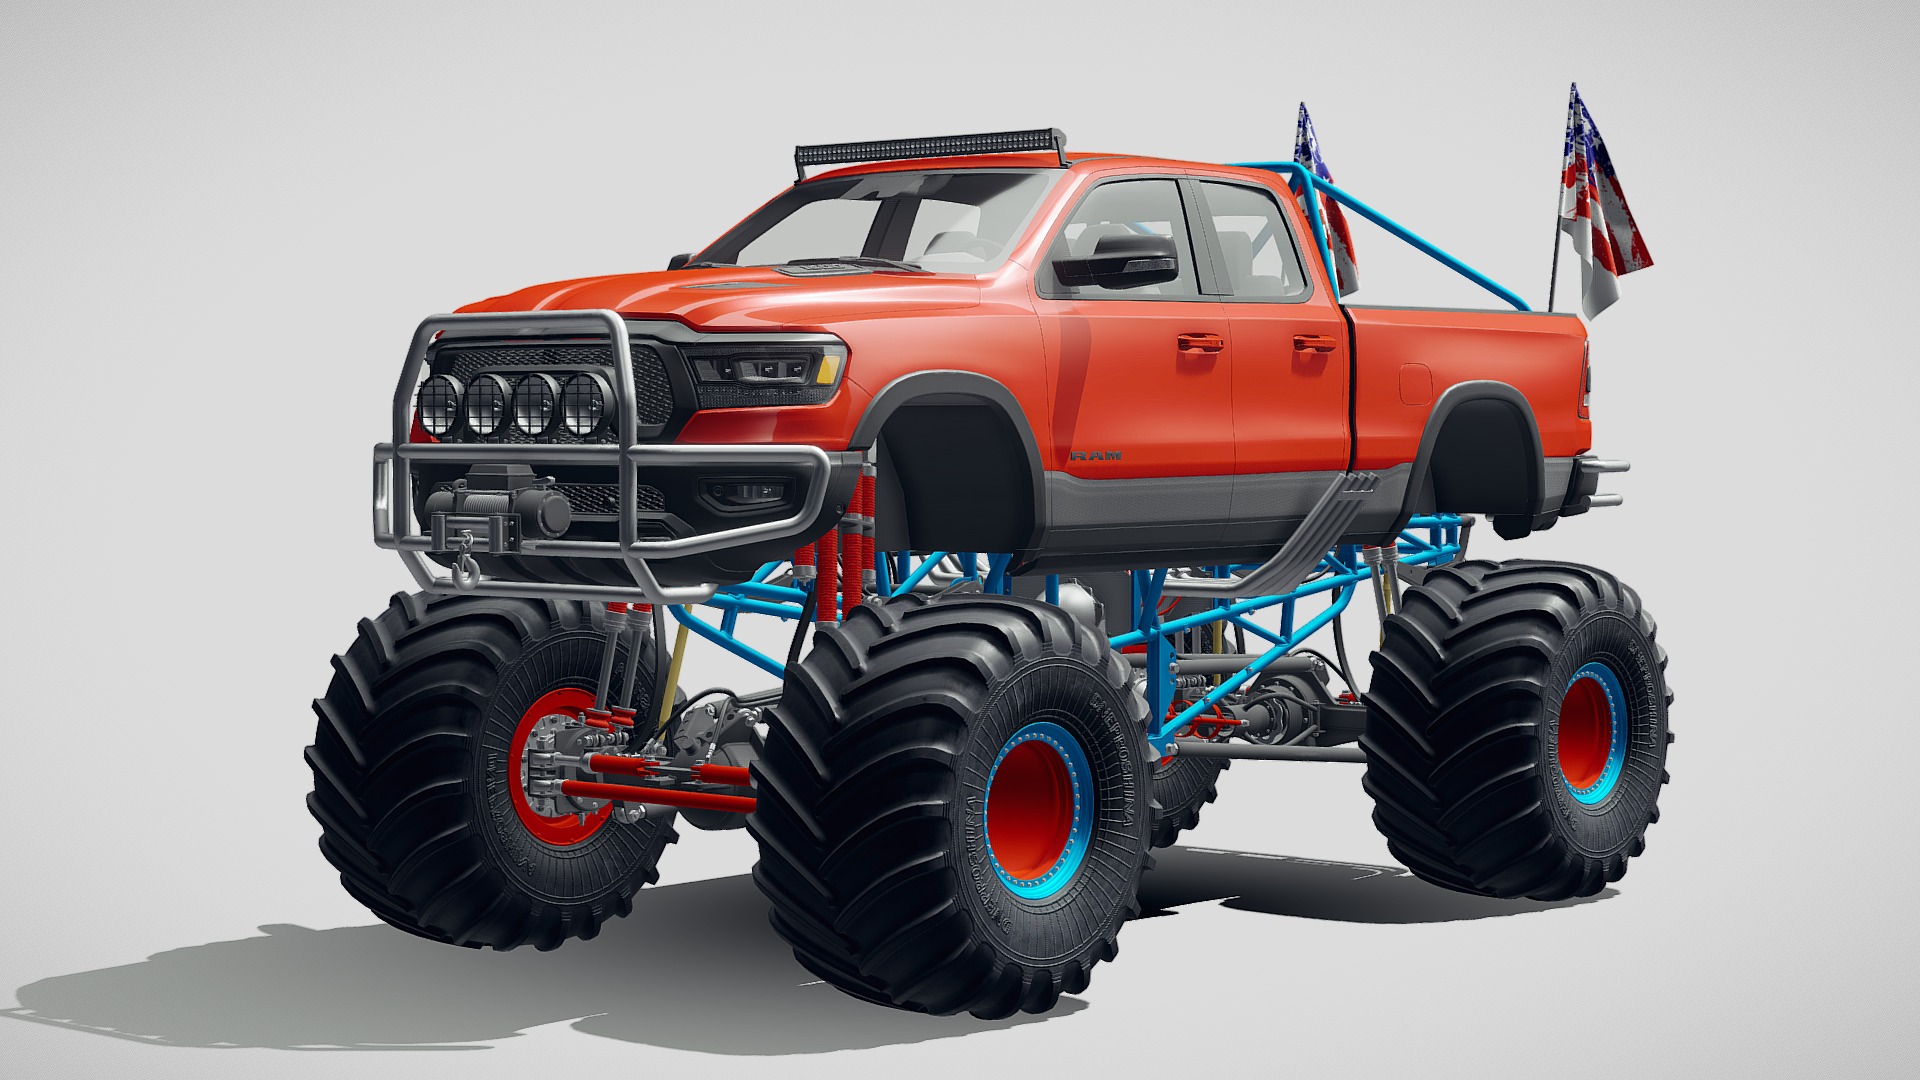 3D model Dodge RAM 1500 Rebel 2019 Monstertruck - This is a 3D model of the Dodge RAM 1500 Rebel 2019 Monstertruck. The 3D model is about a red truck with large tires.